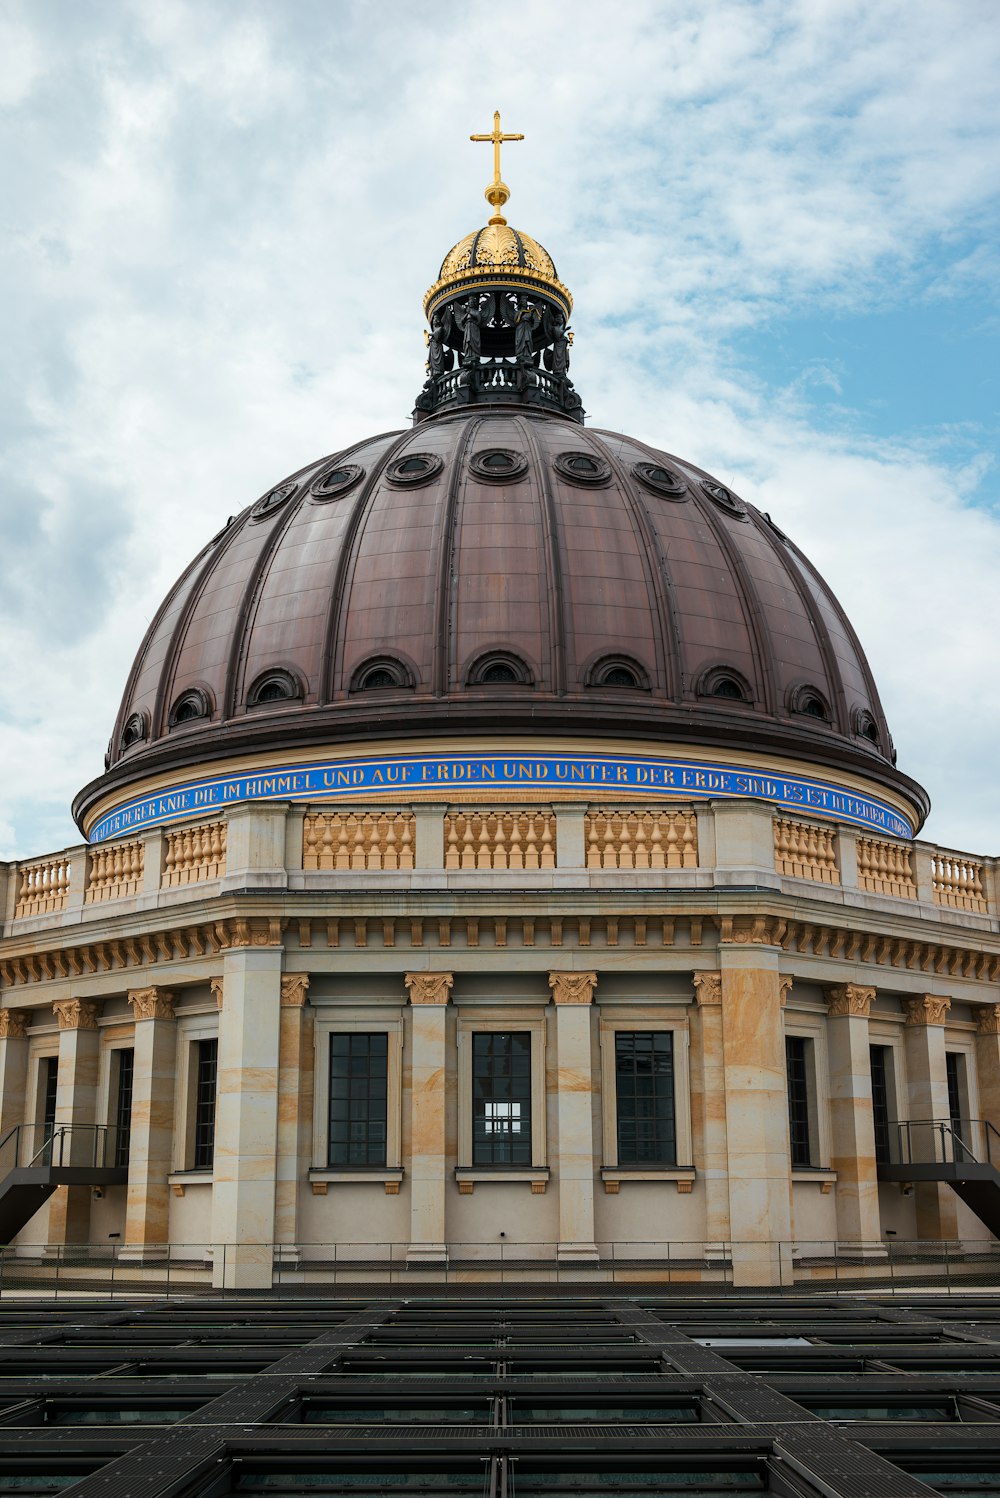 a large dome with a cross on top of it